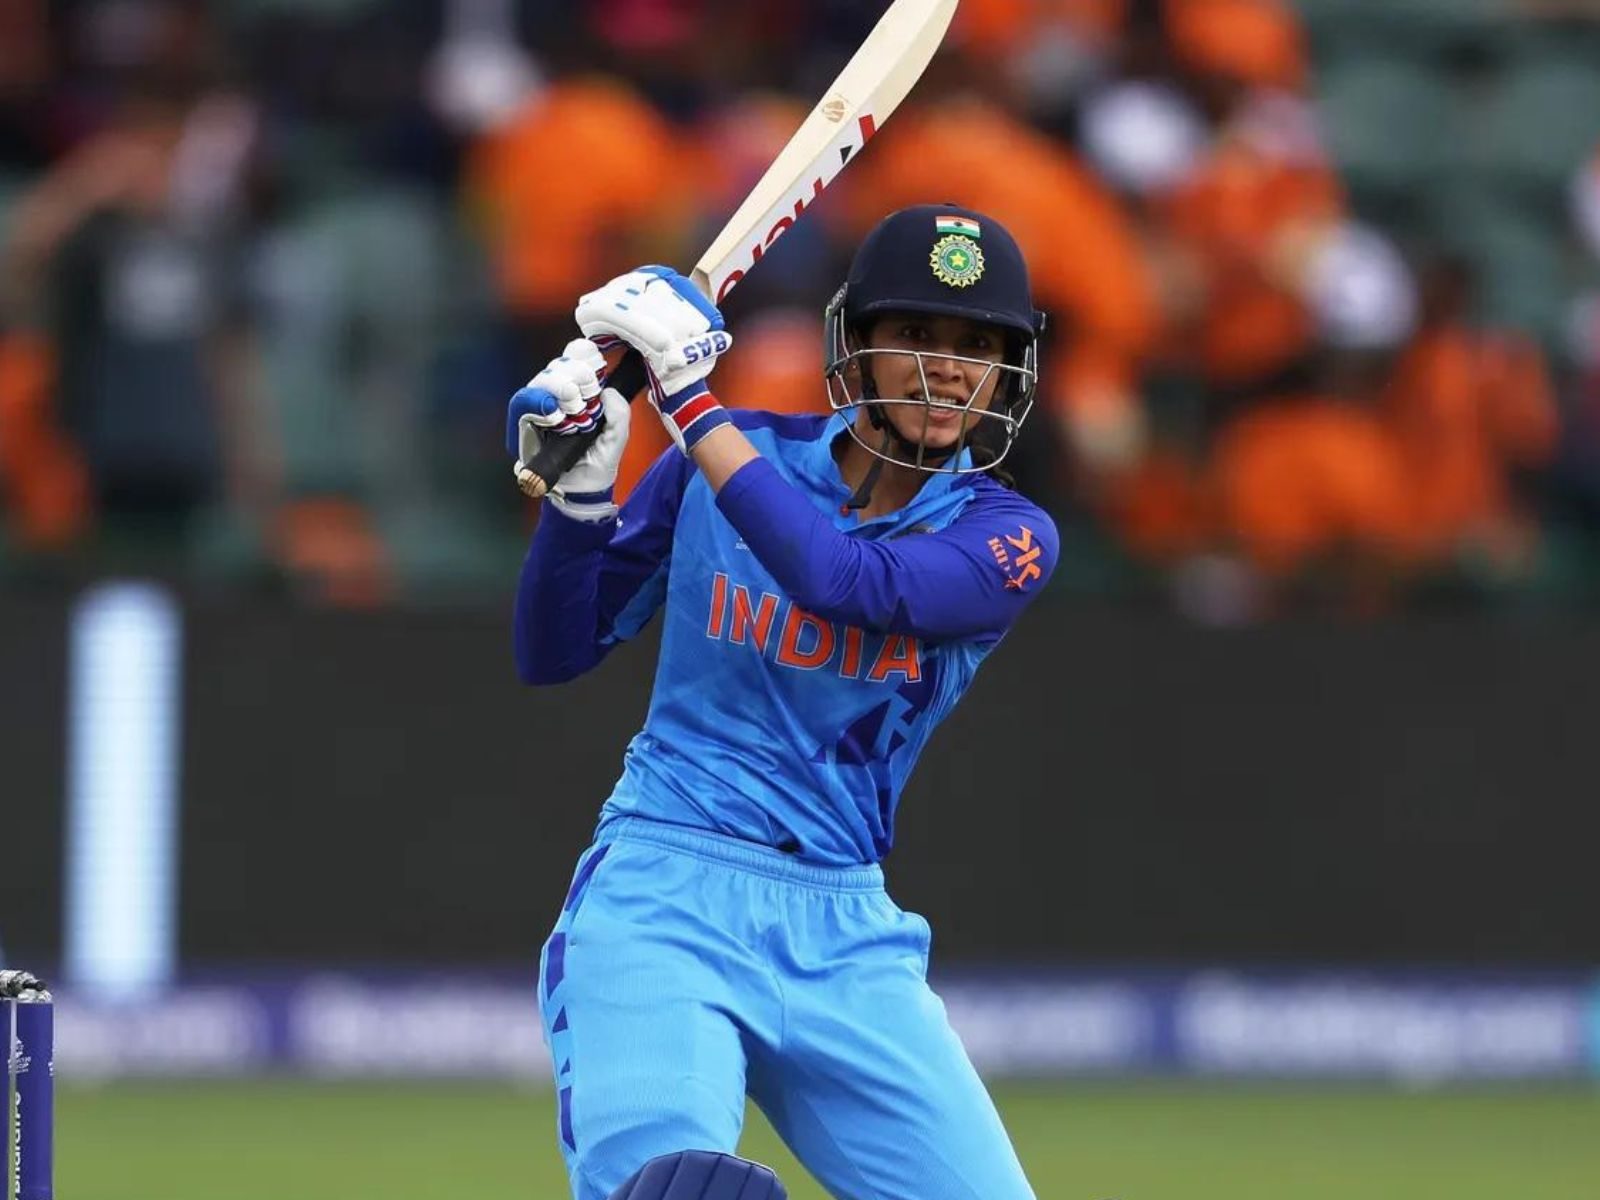 Womens T20 World Cup, India Women vs Ireland Women Live Streaming When and Where to Watch Live Coverage on TV, Online